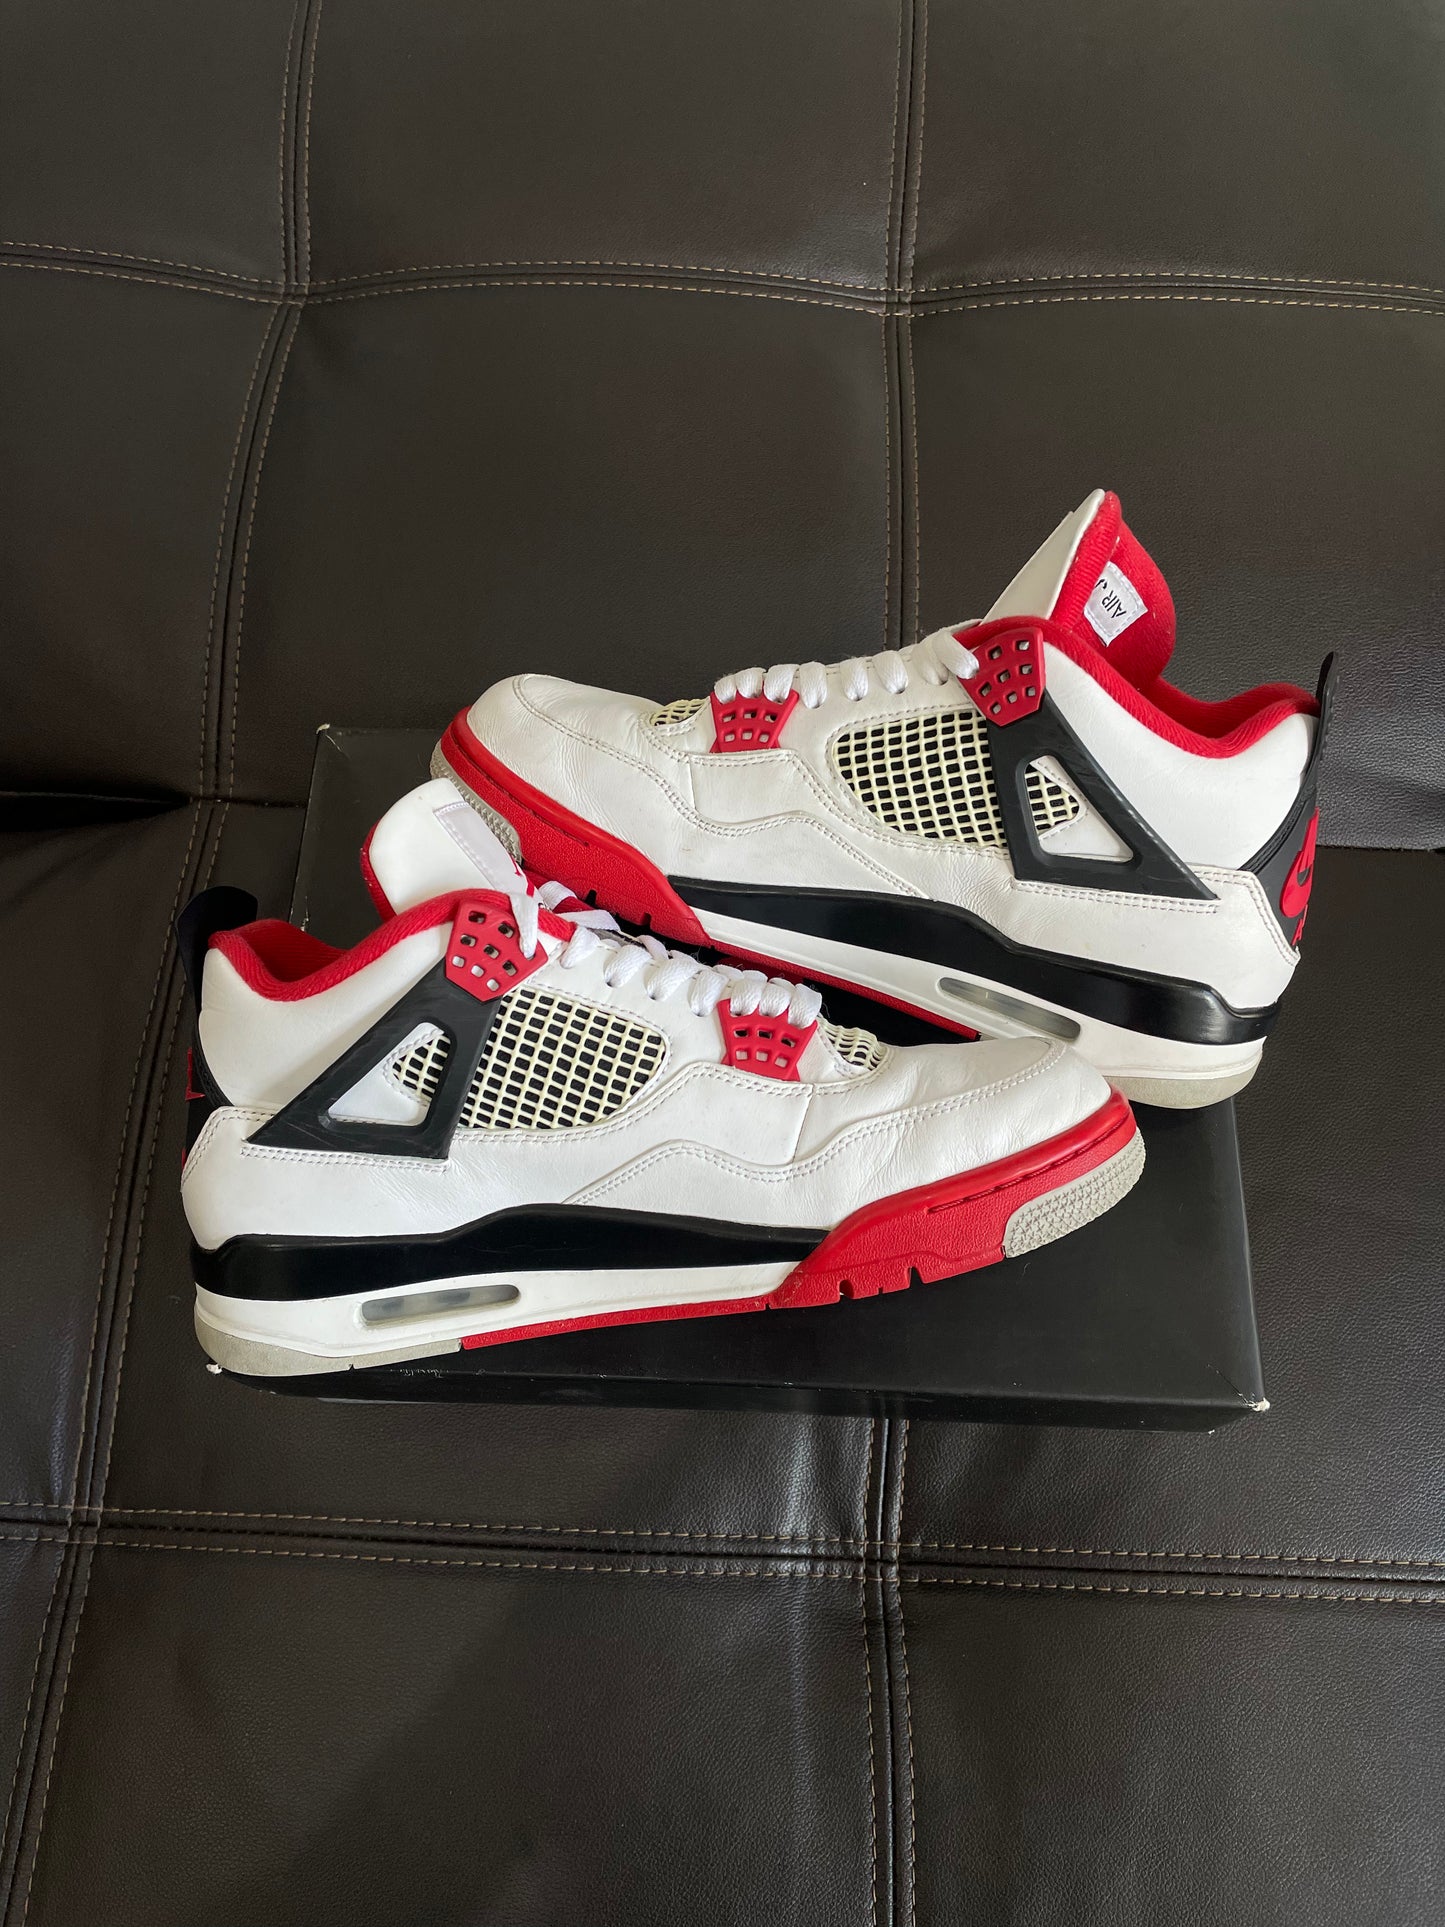 (Used Size 9M) Jordan 4 Fire Red (2020)